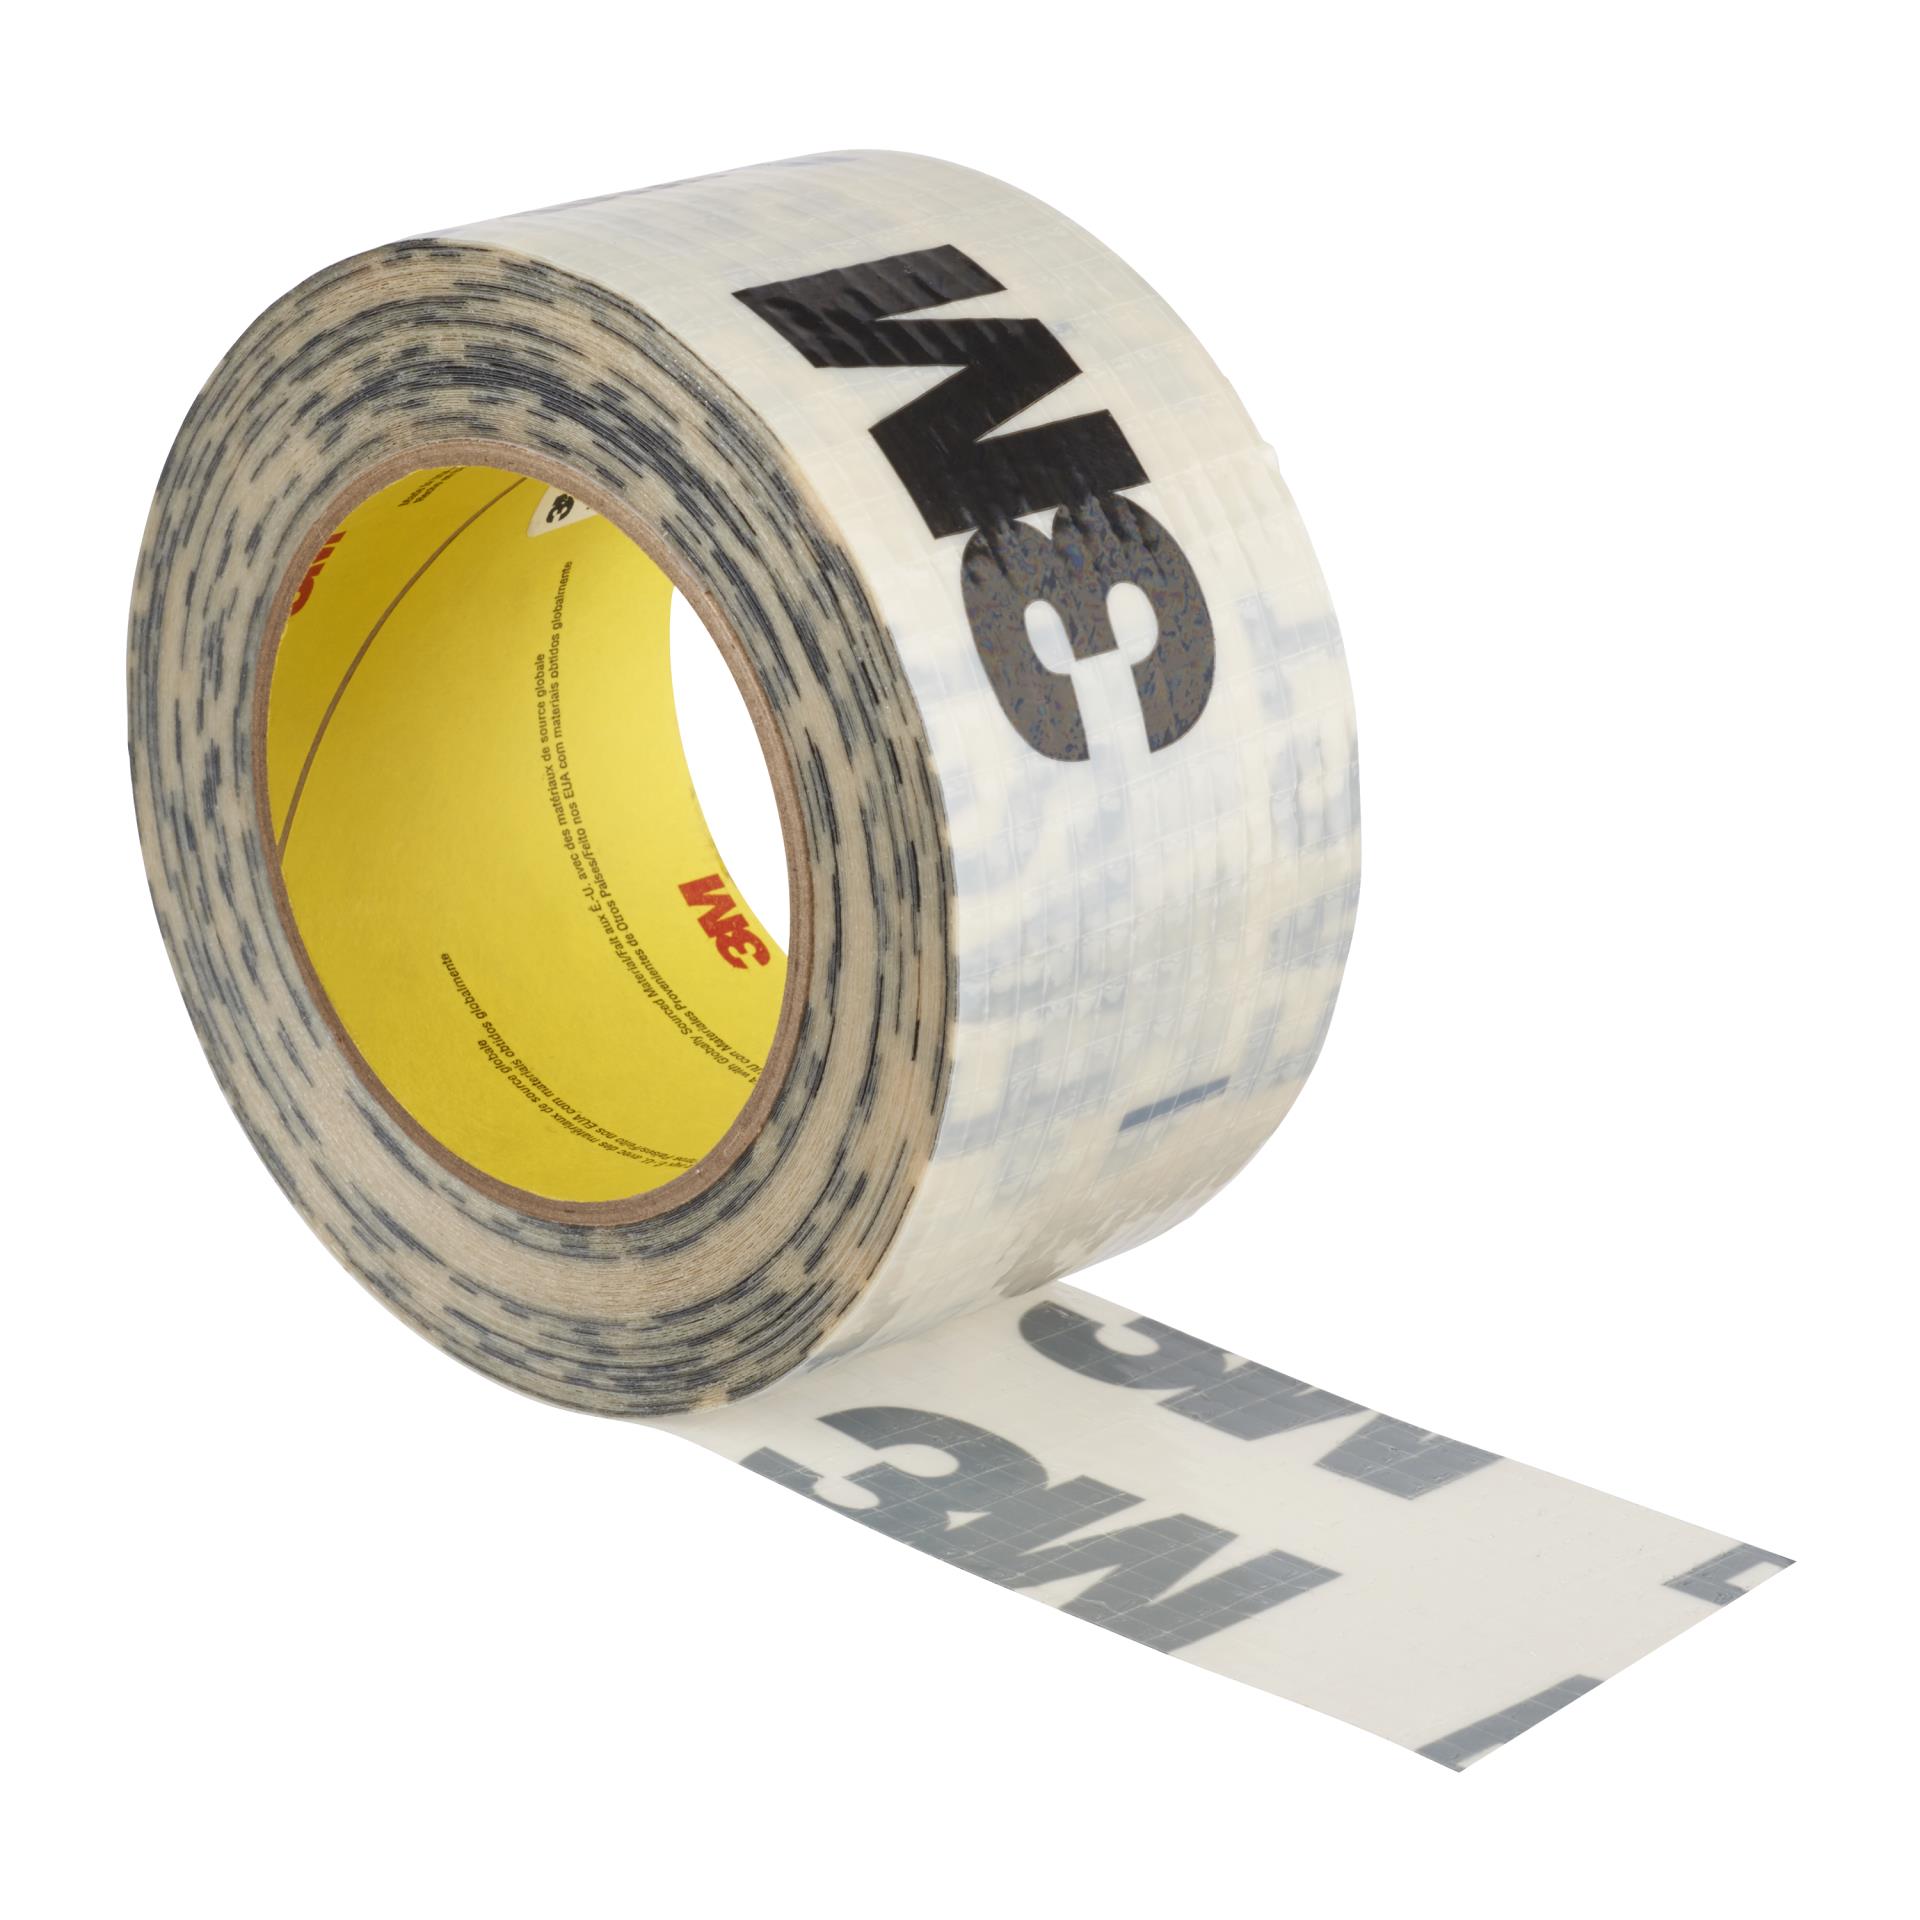 https://www.e-aircraftsupply.com/ItemImages/42/7010376442_3M_Grid_Air_Sealing_Tape_8068.jpg